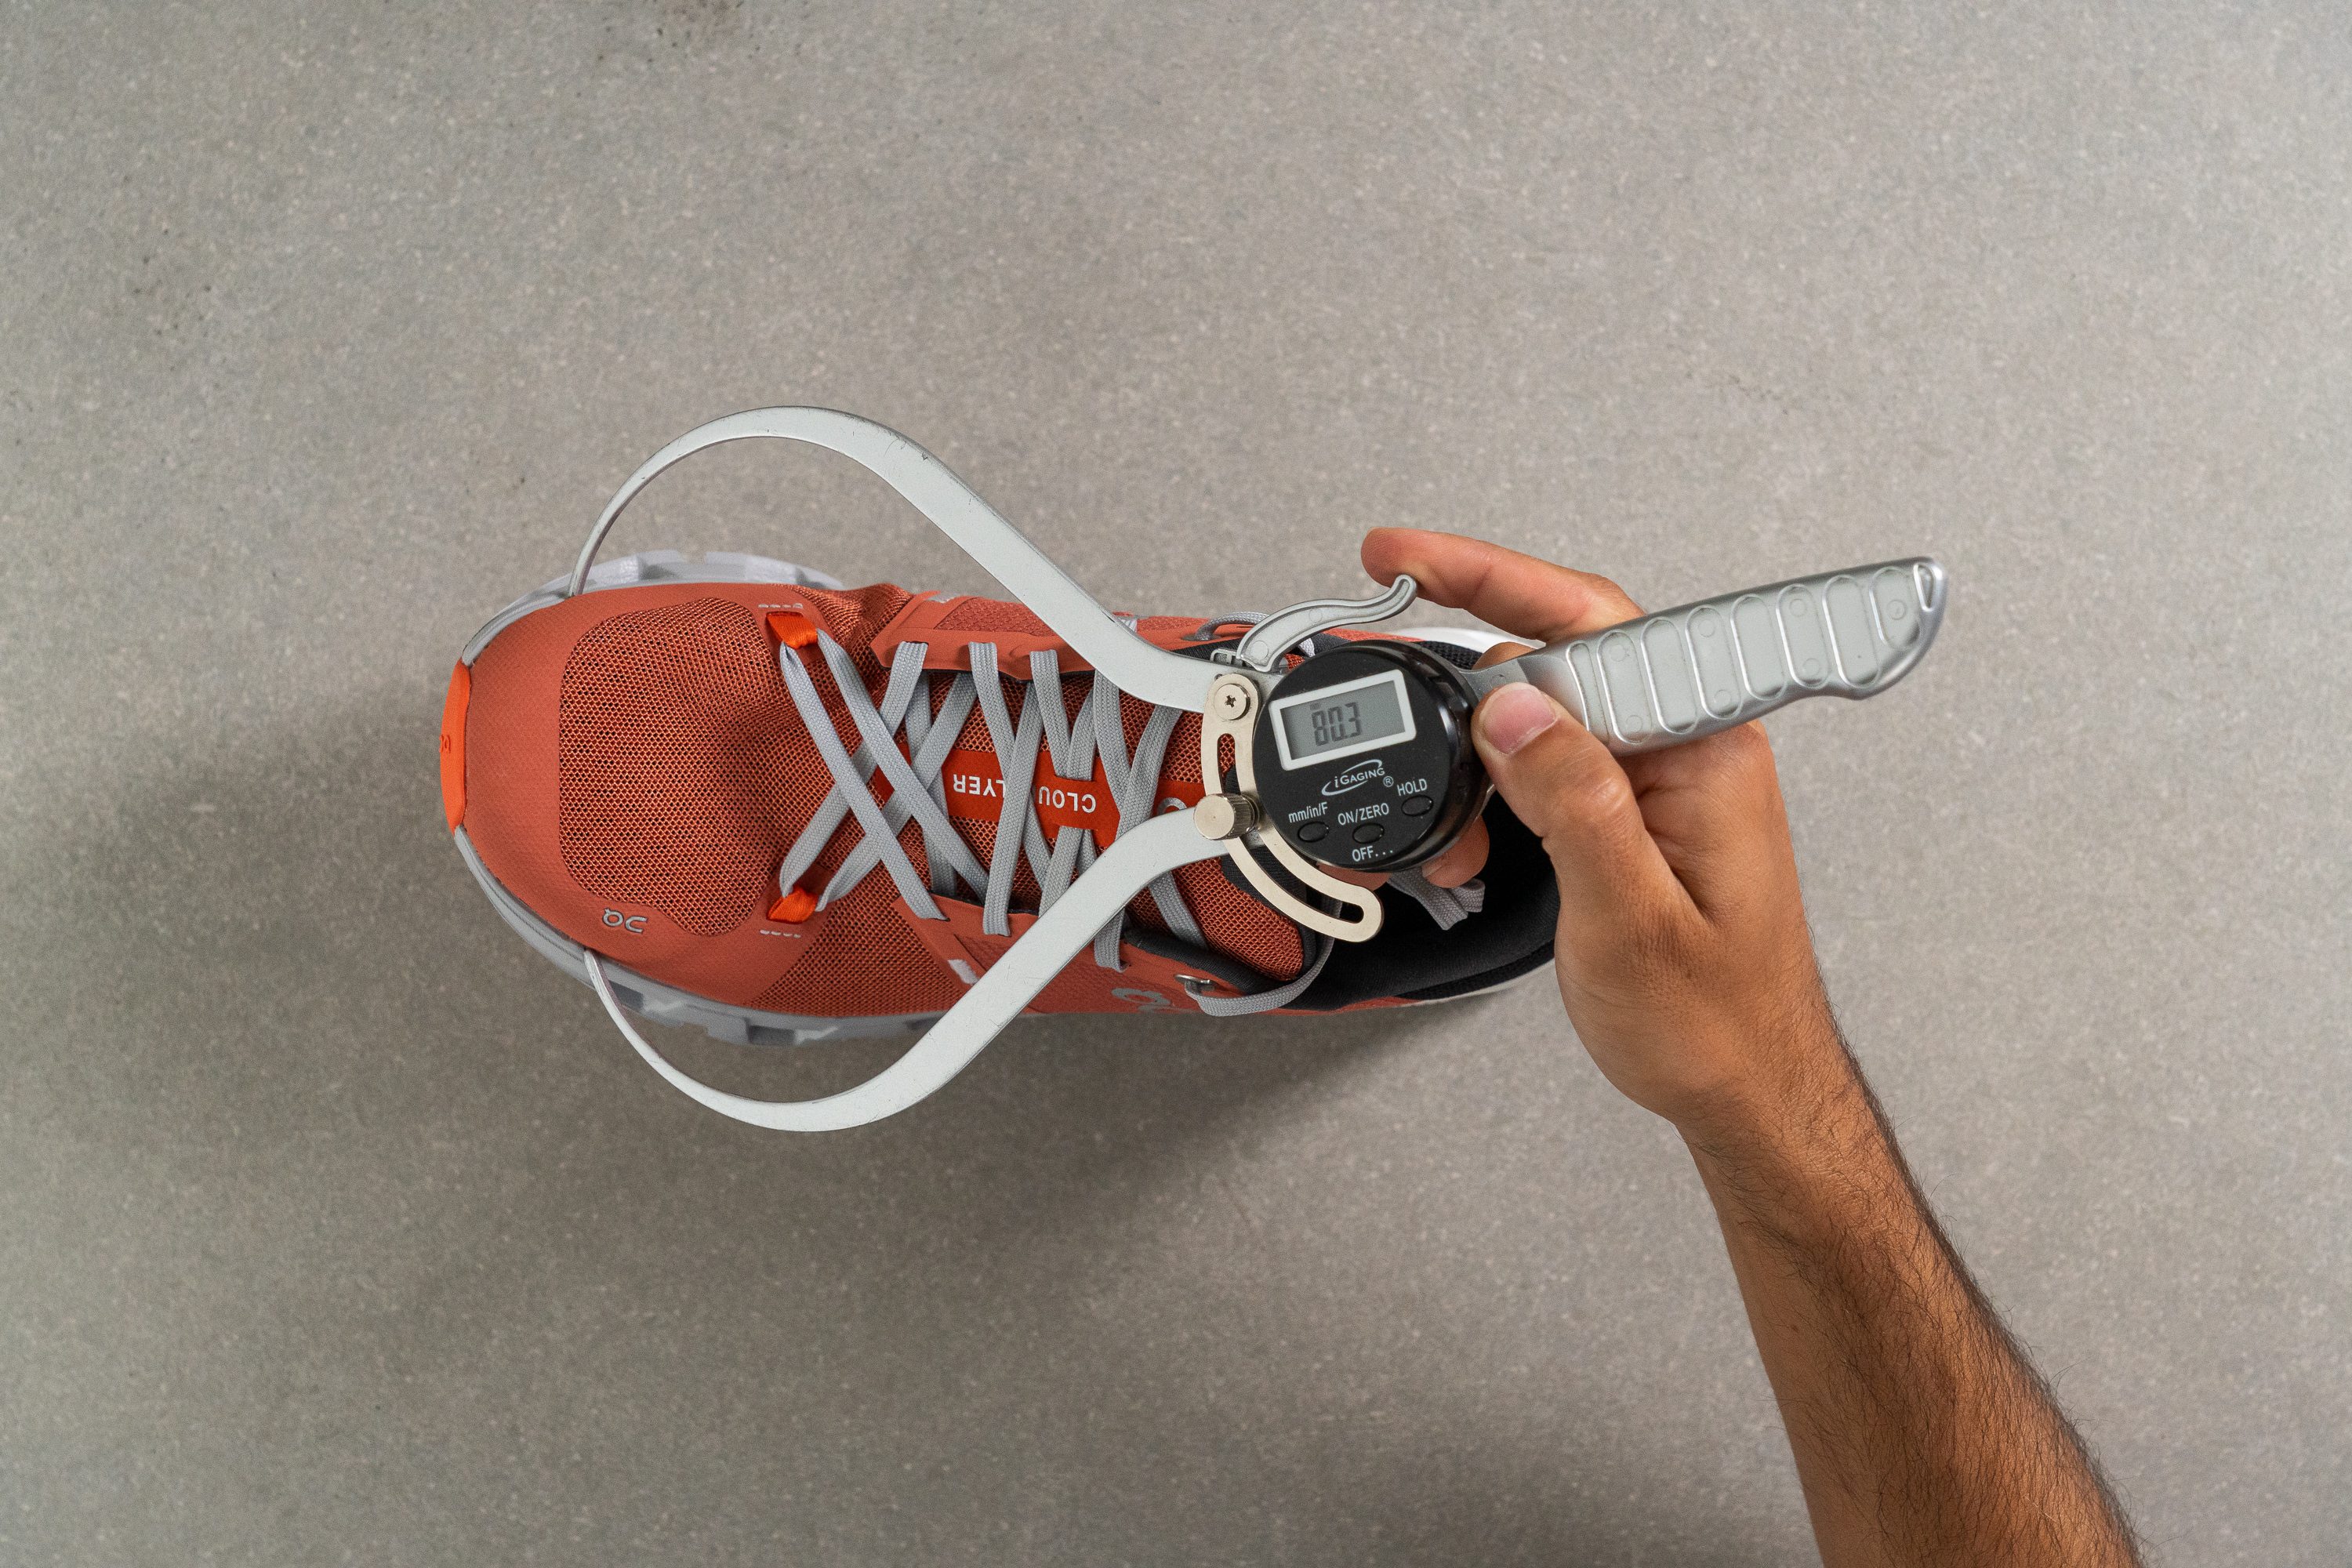 On Cloudflyer 4 Measuring at 116.3 mm, it outshines the width of nearly every other running shoe